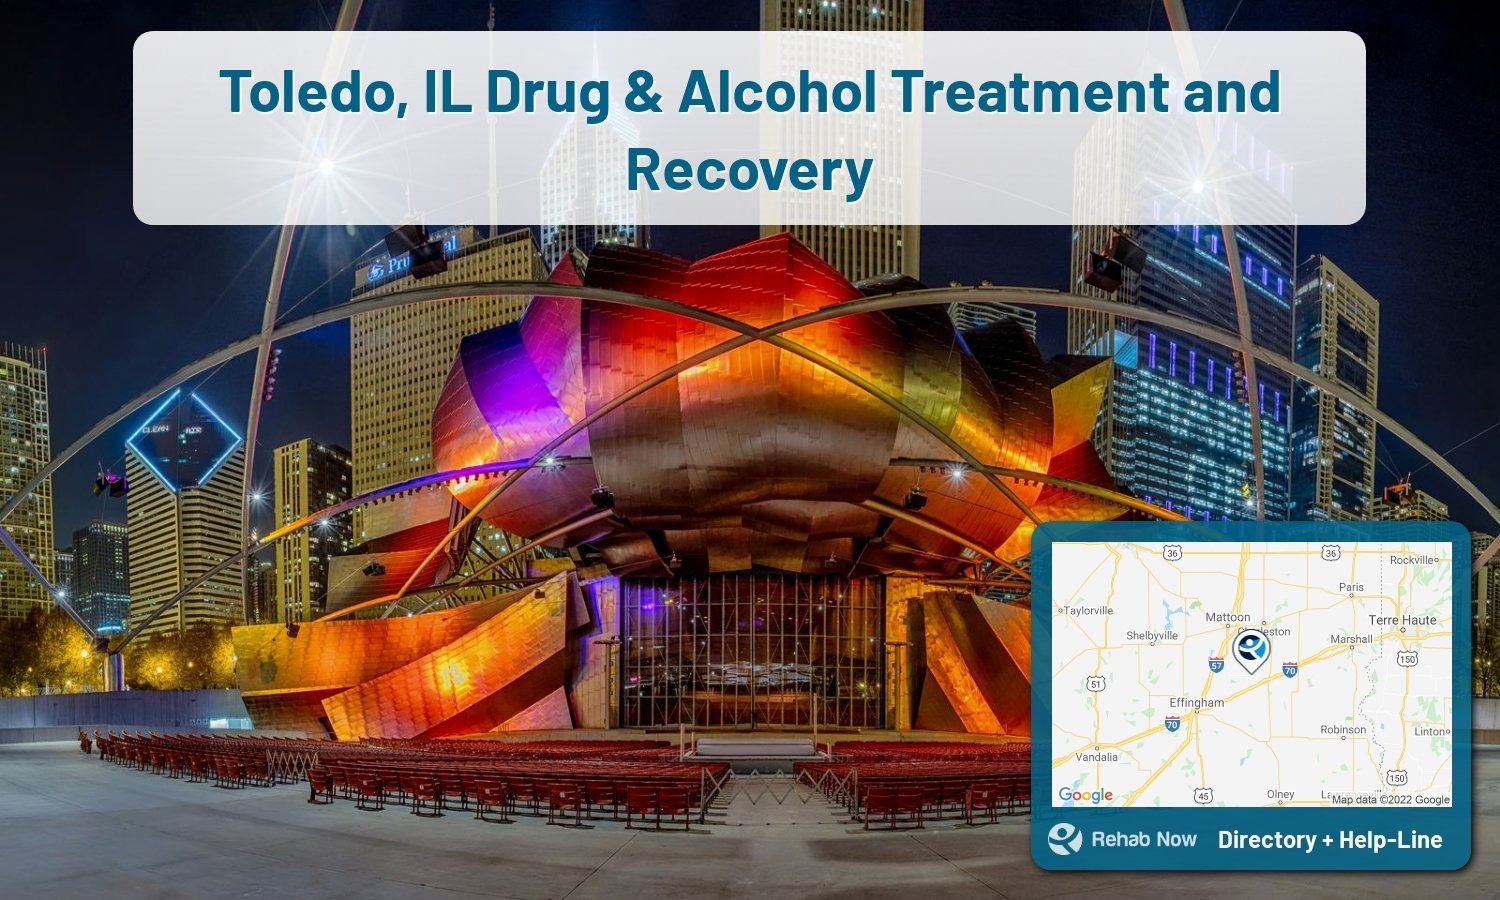 List of alcohol and drug treatment centers near you in Toledo, Illinois. Research certifications, programs, methods, pricing, and more.